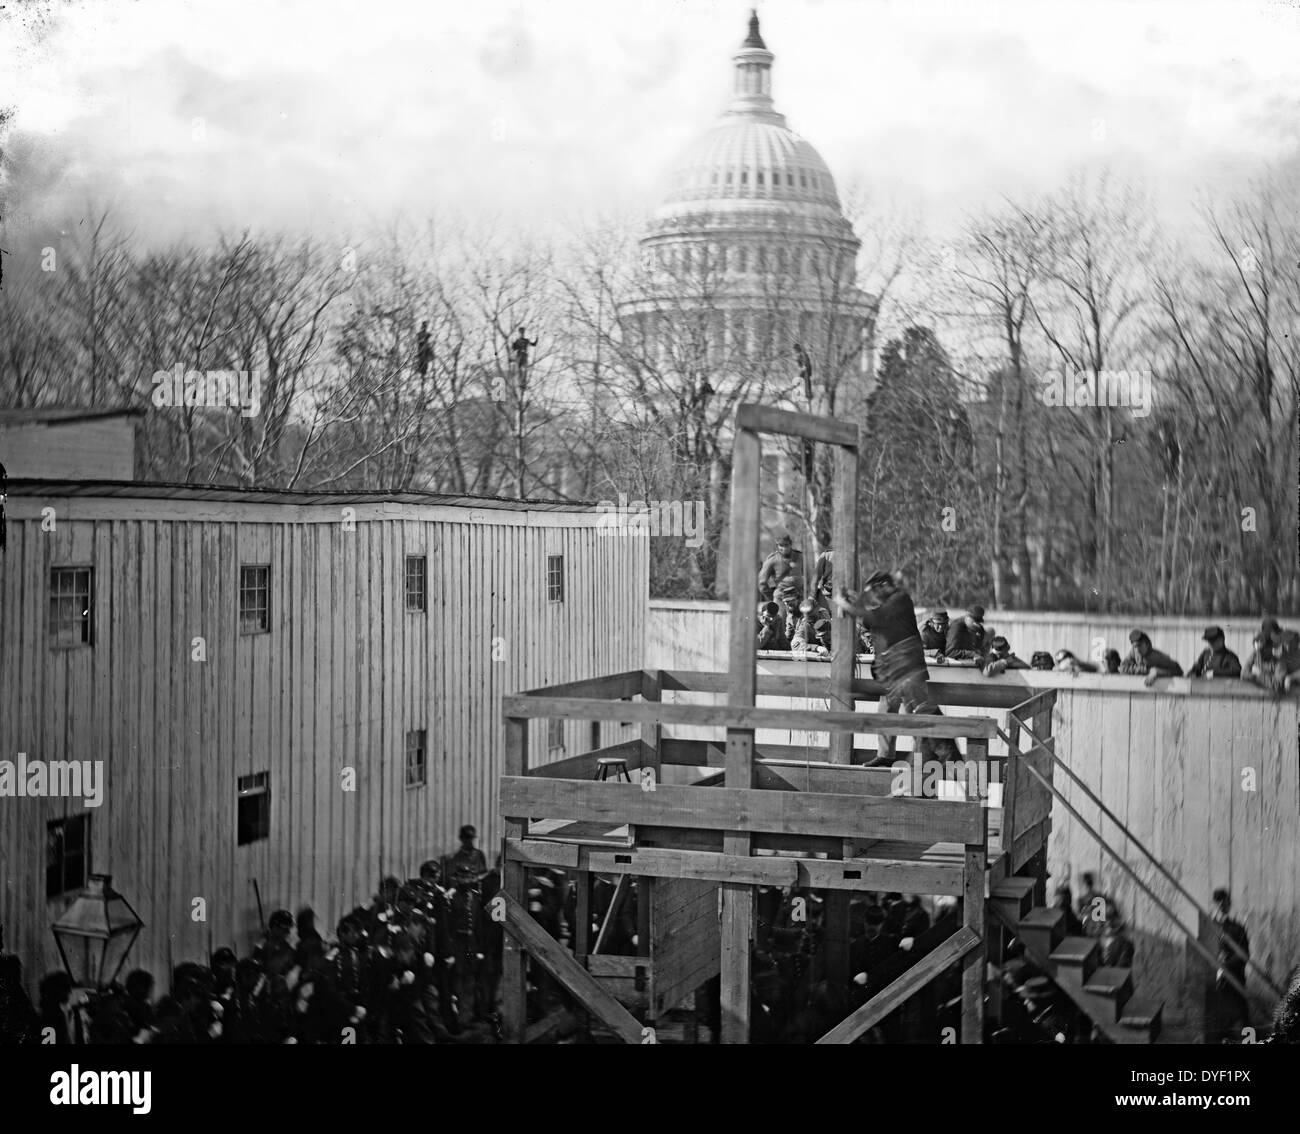 Washington, D.C. Soldier springing the trap for the execution of Captain Henry Wirz, November 1865. Heinrich Hartmann Wirz better known as Henry Wirz (November 25, 1823 – November 10, 1865) was a Swiss-born Confederate officer in the American Civil War. He is best known for his command of Camp Sumter, the Confederate prisoner of war camp near Andersonville, Georgia; he was tried and executed after the war for conspiracy and murder relating to his command of the camp. Stock Photo